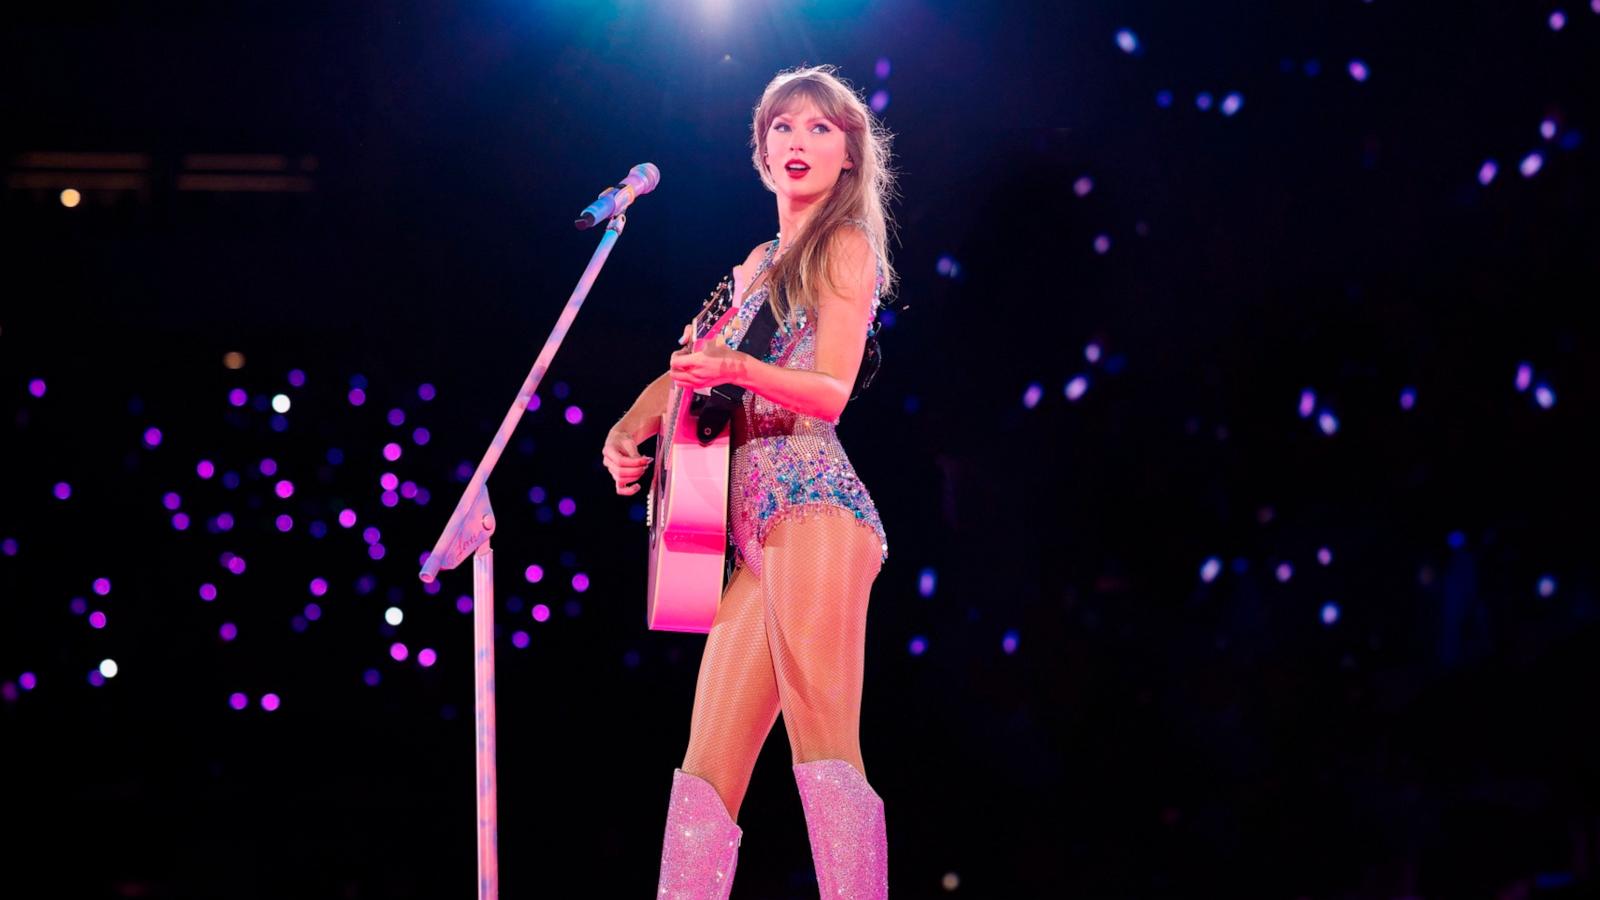 PHOTO: Taylor Swift's concert film “Taylor Swift | The Eras Tour (Taylor’s Version)” will debut exclusively on Disney+ on March 14 at 6:00pm PT.